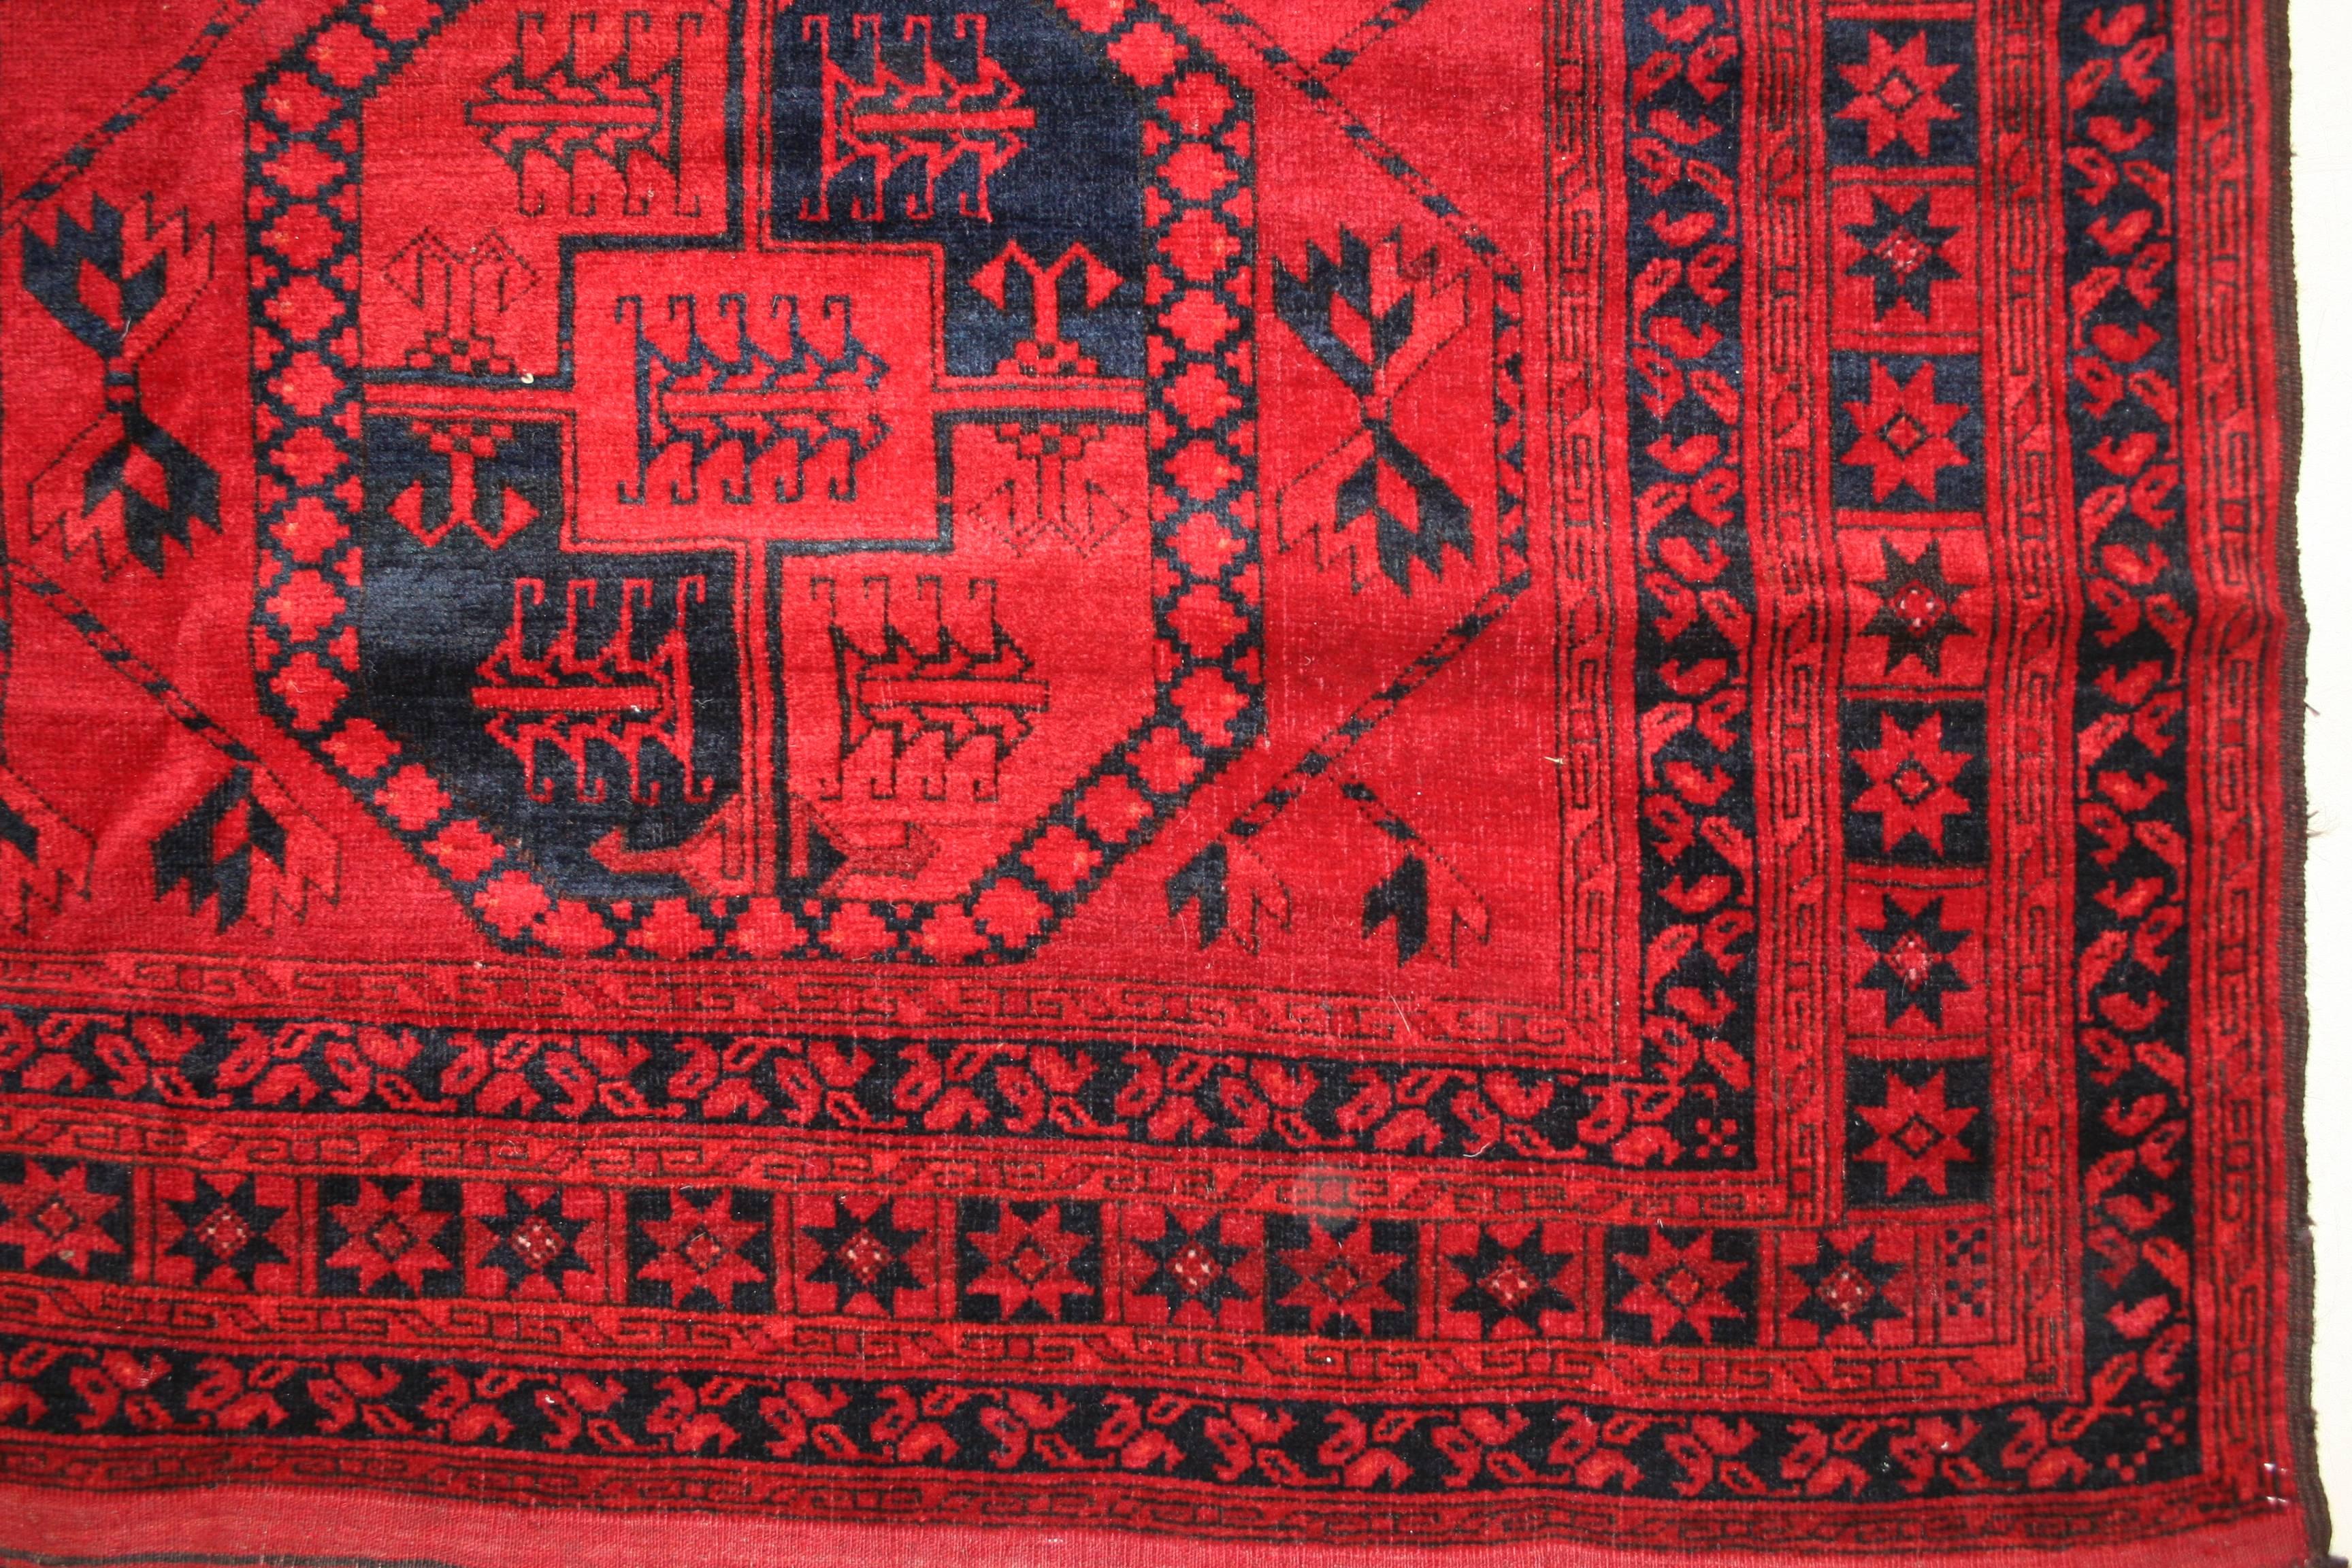 A classic Turkmen Main carpet distinguished by a unique tonality of ruby red for the background. The allover pattern composed of three parallel rows of octagonal devices is a characteristic feature of the Ersari Turkmen tribe, located near the oasis